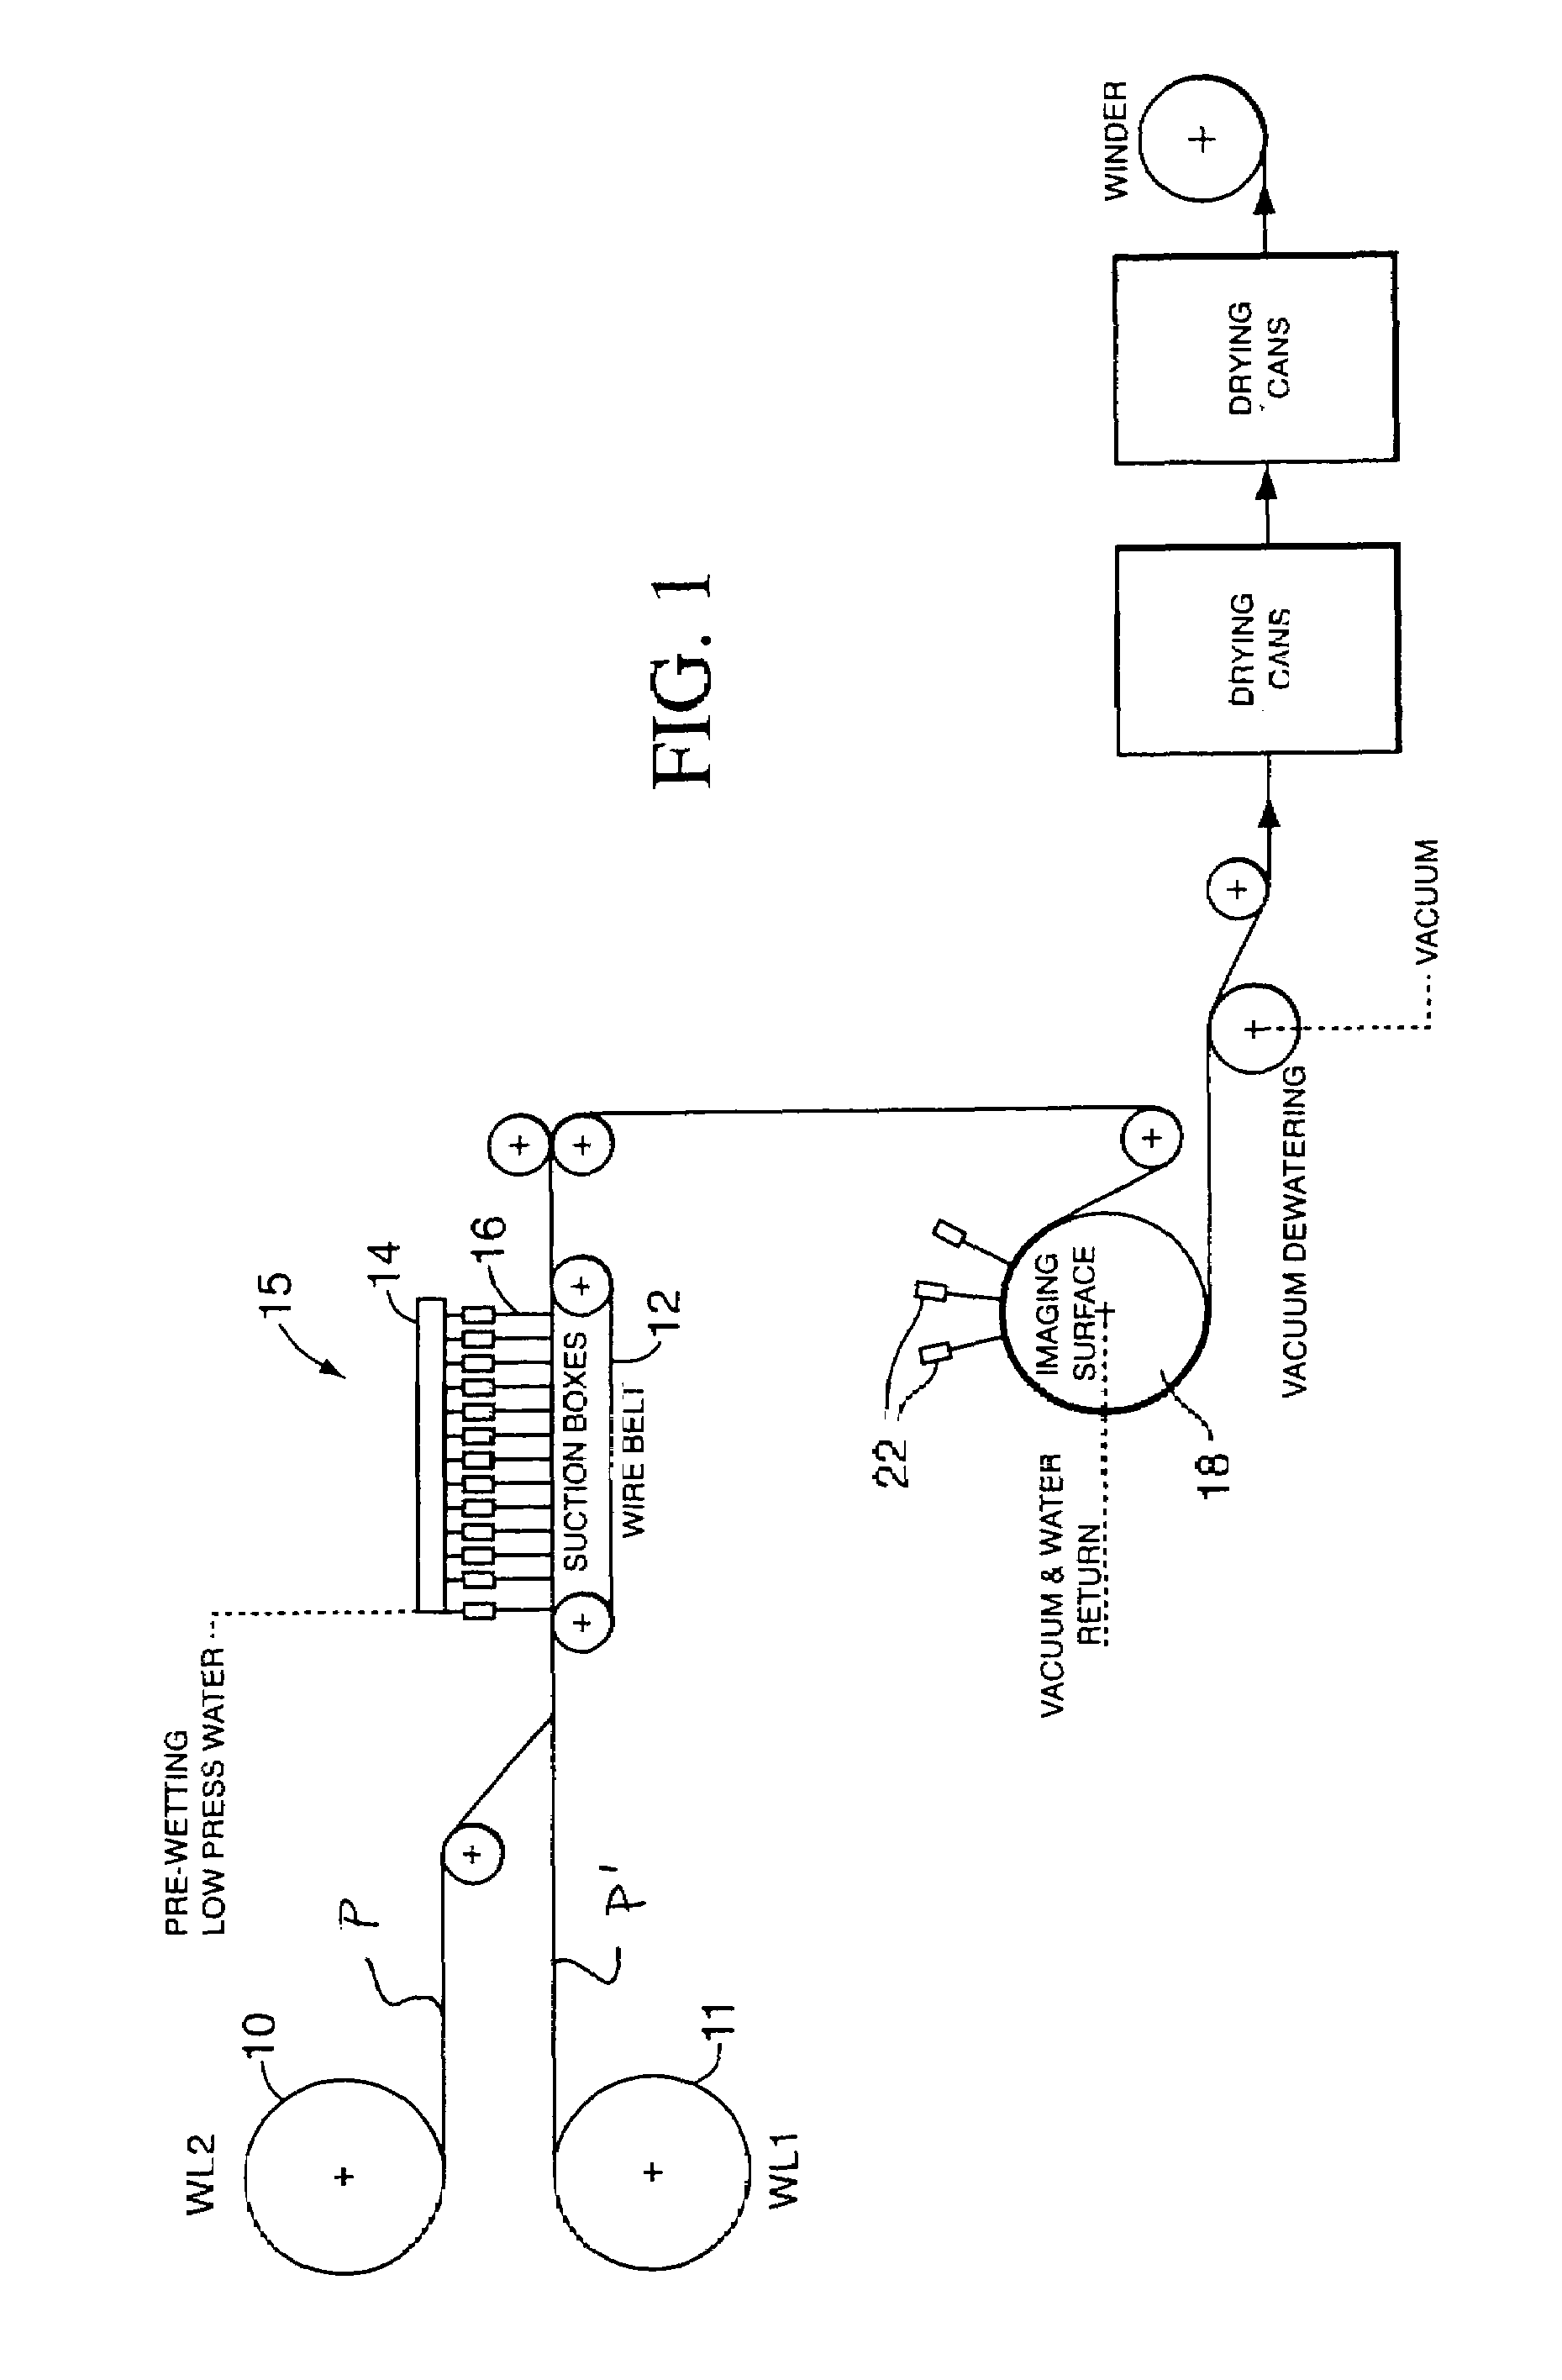 Structurally stable flame retardant bedding articles